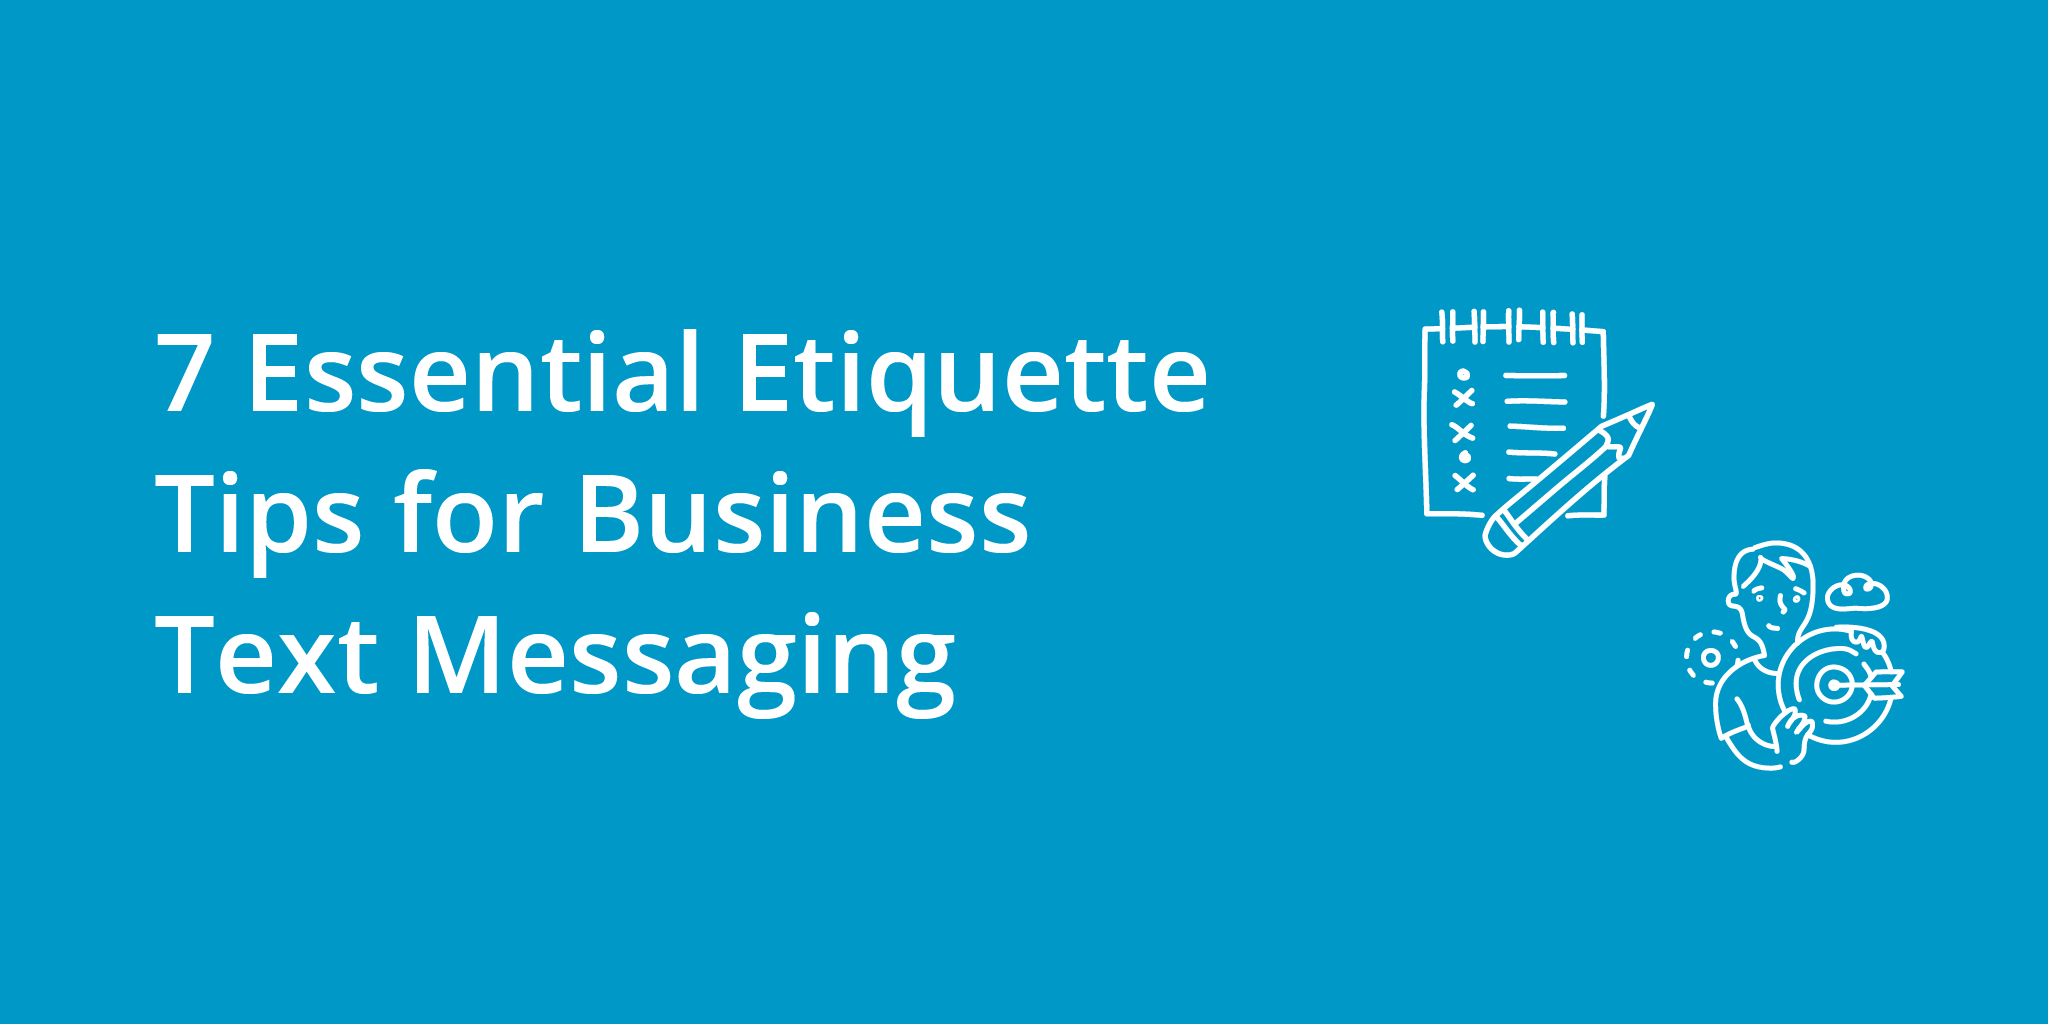 7 Essential Etiquette Tips for Business Text Messaging | Telephones for business